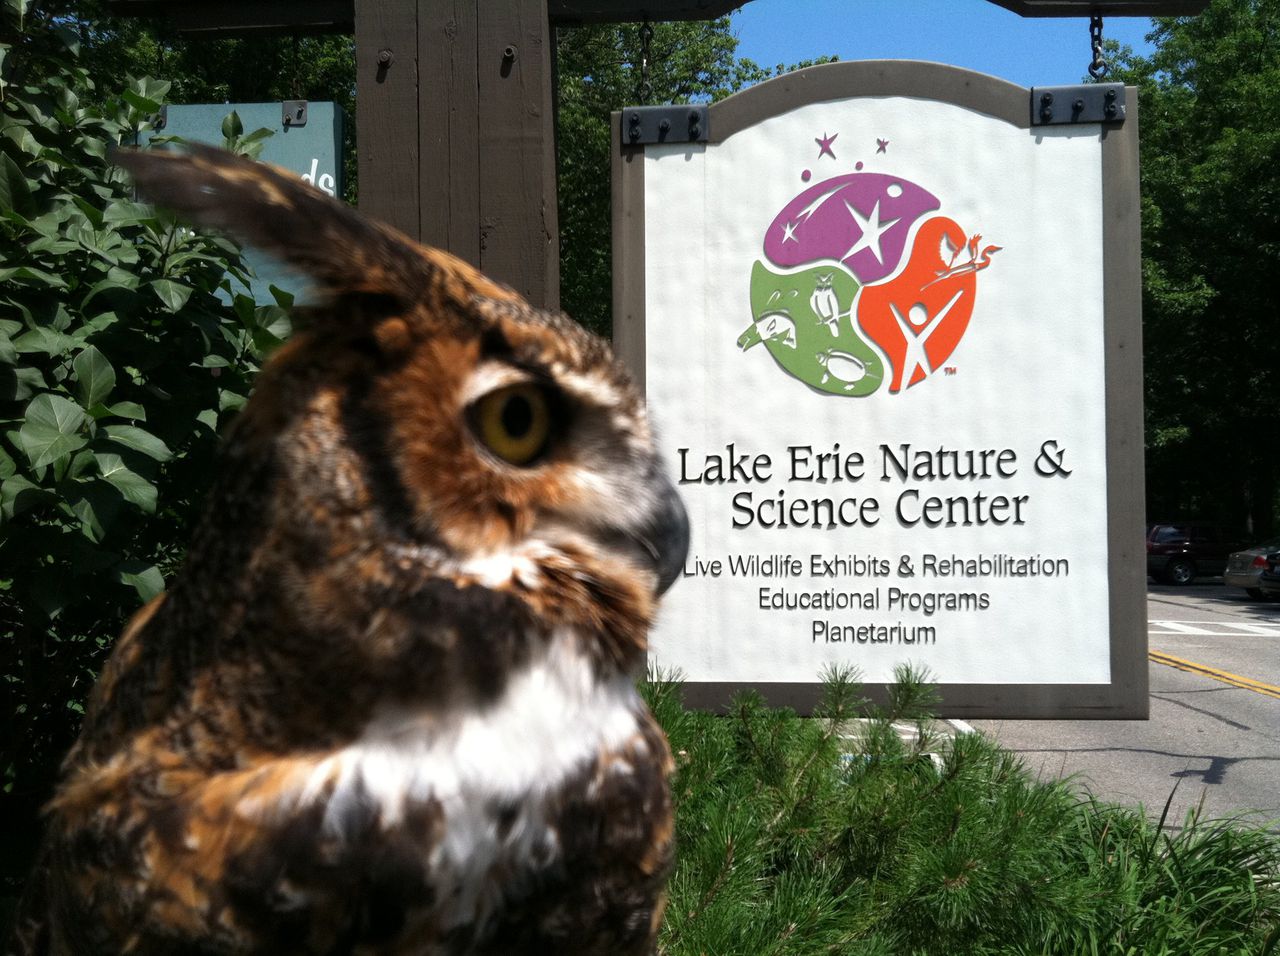 Lake Erie Nature & Science Center offers internships and closer contact with the animals